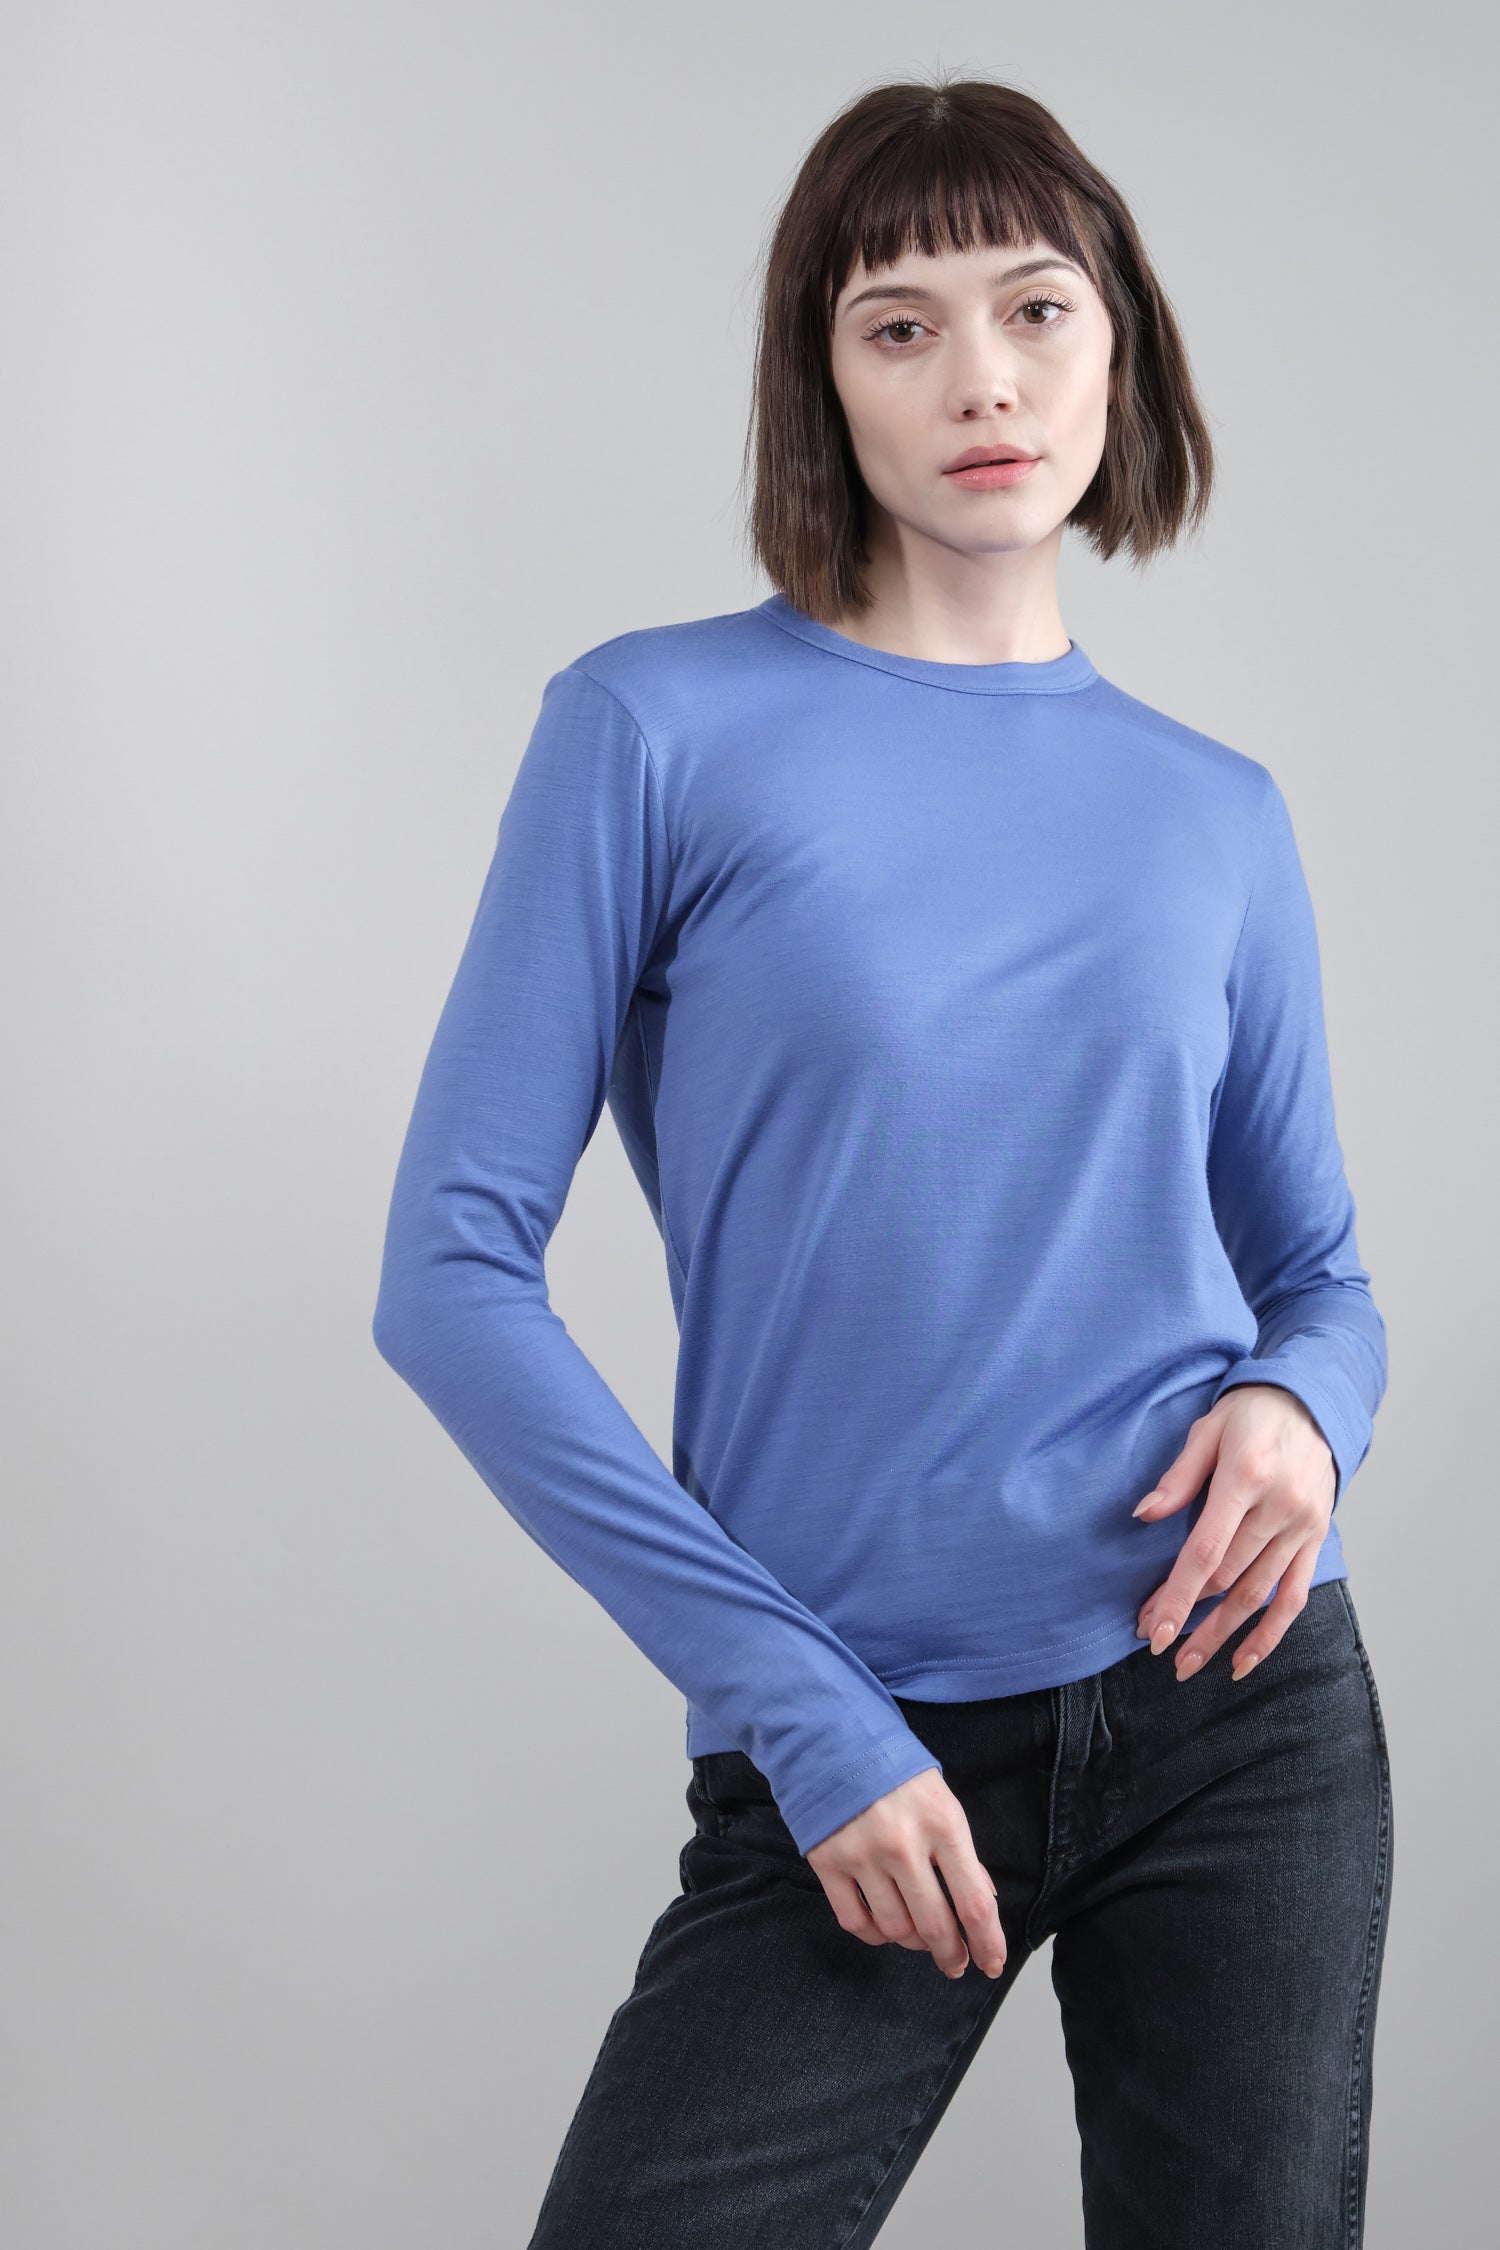 Tad Long Sleeve Top in Anemome